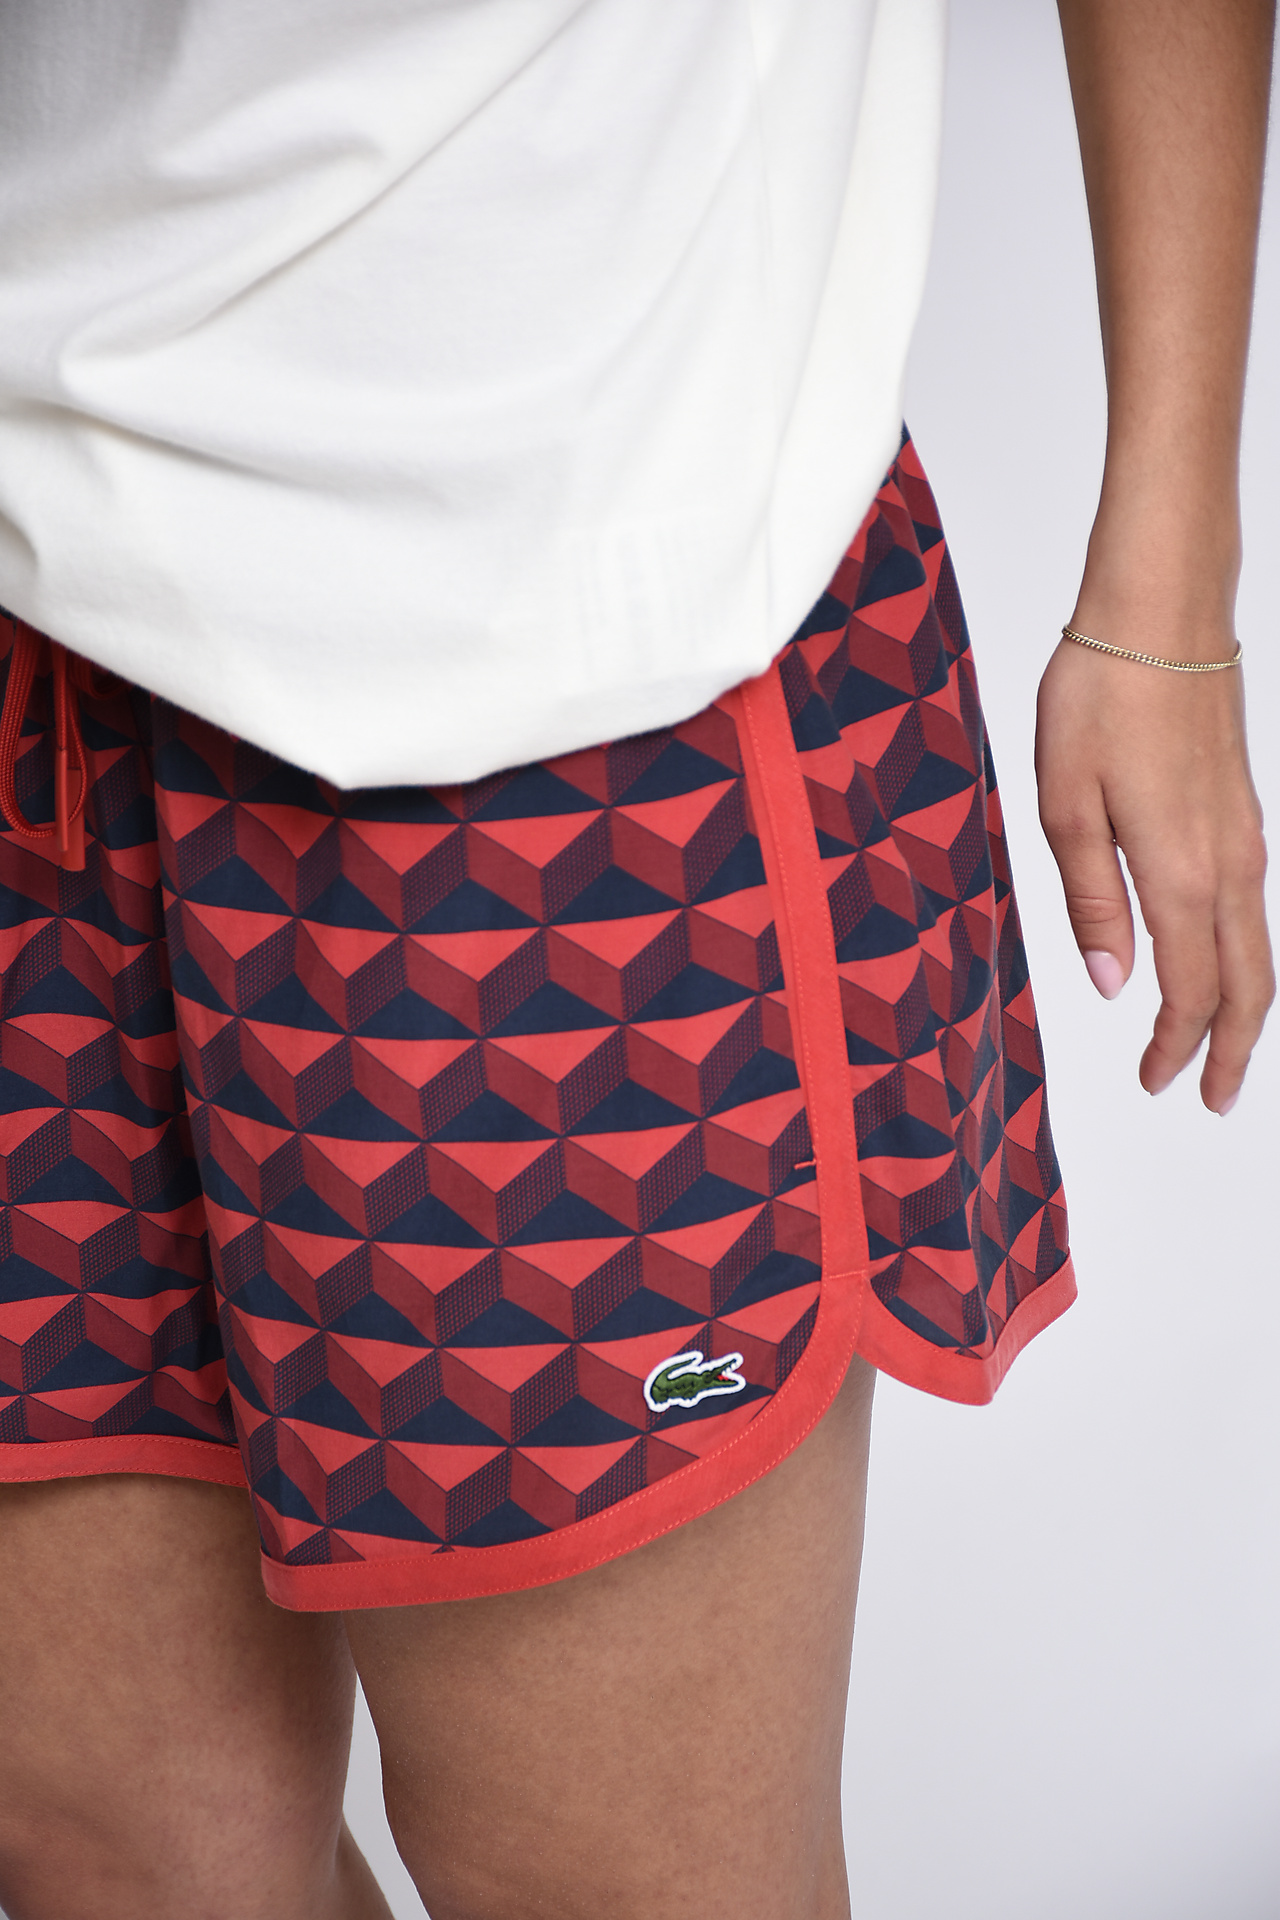 Lacoste Shorts Red